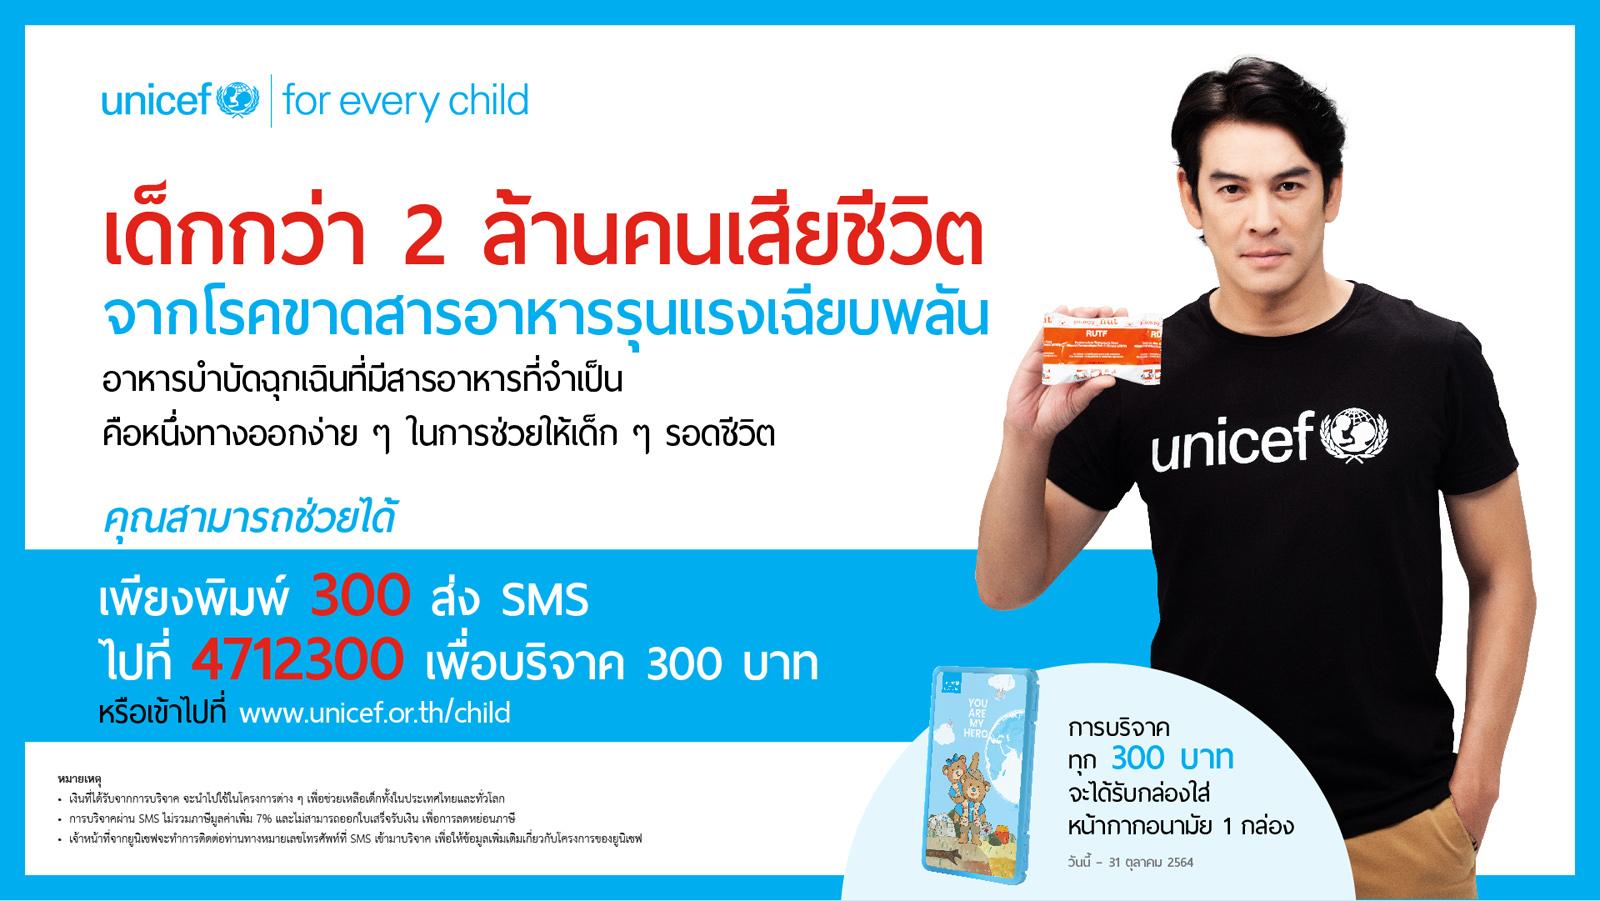 Shahkrit Yamnarm joins UNICEF Thailand to save lives of malnourished children during COVID-19